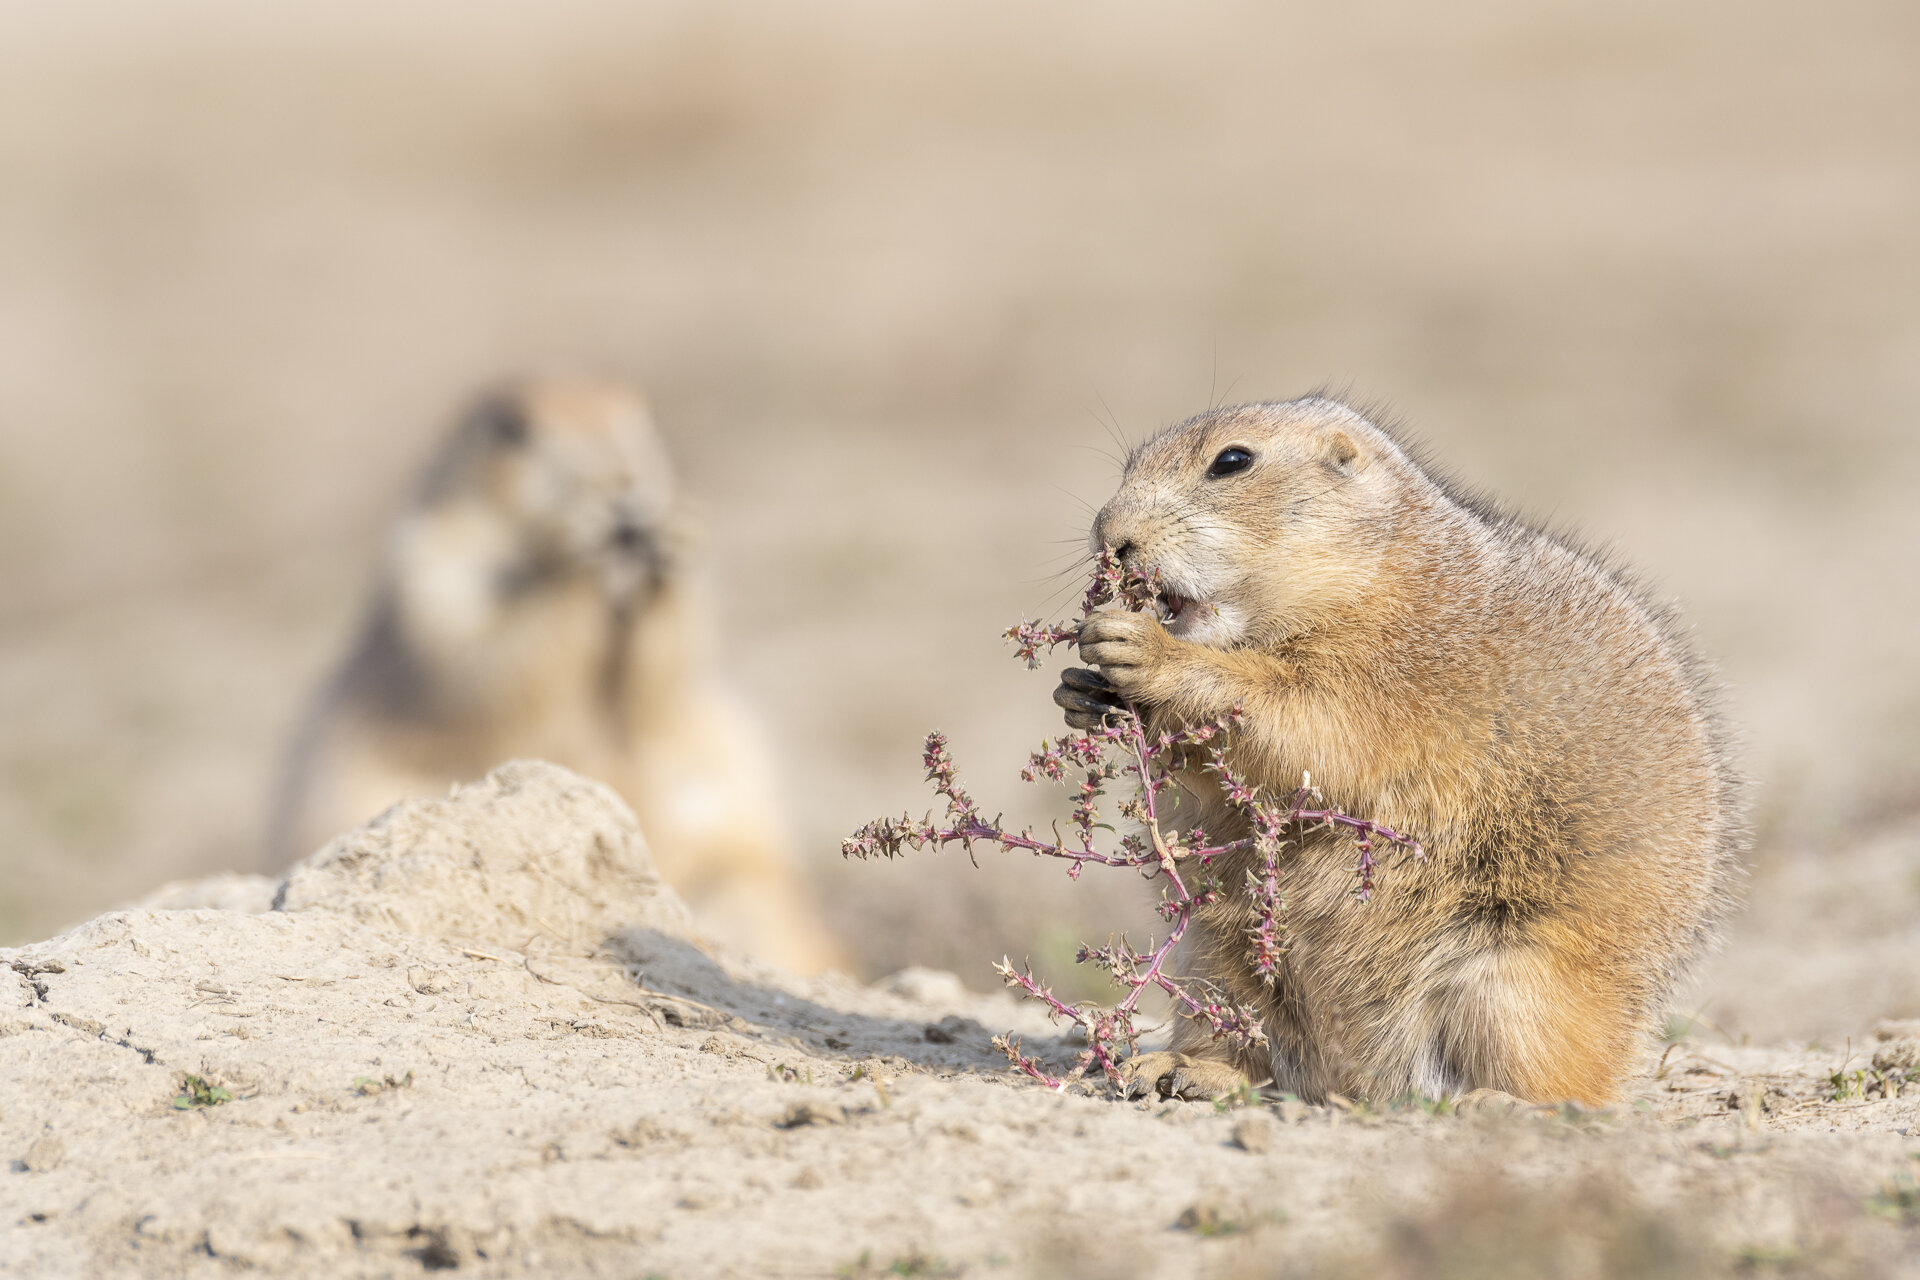 Black-tailed prairie dogs snacking on Russian thistle